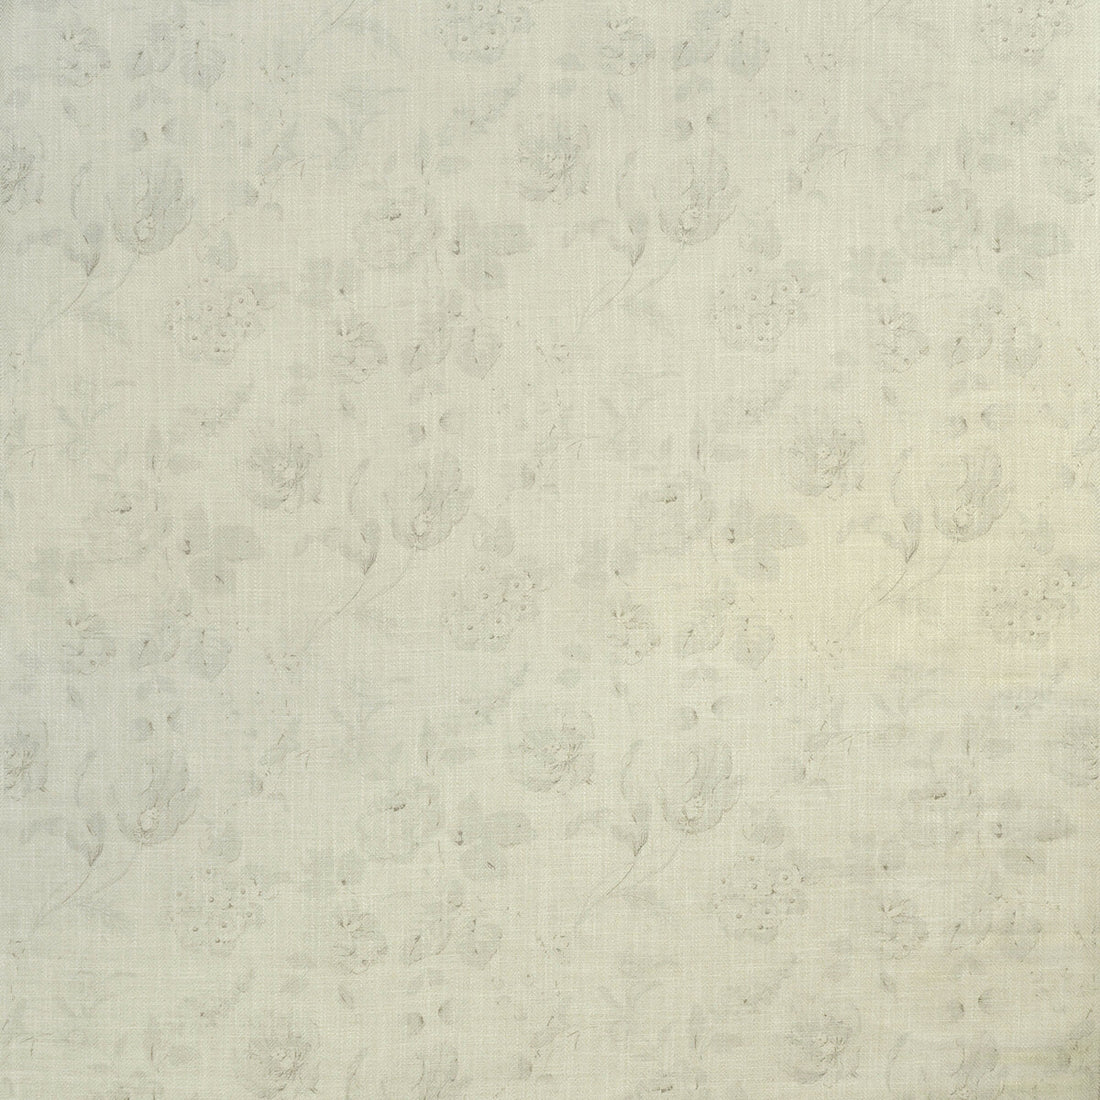 Narikala fabric in cloud color - pattern AM100336.1.0 - by Kravet Couture in the Andrew Martin Hindukush collection